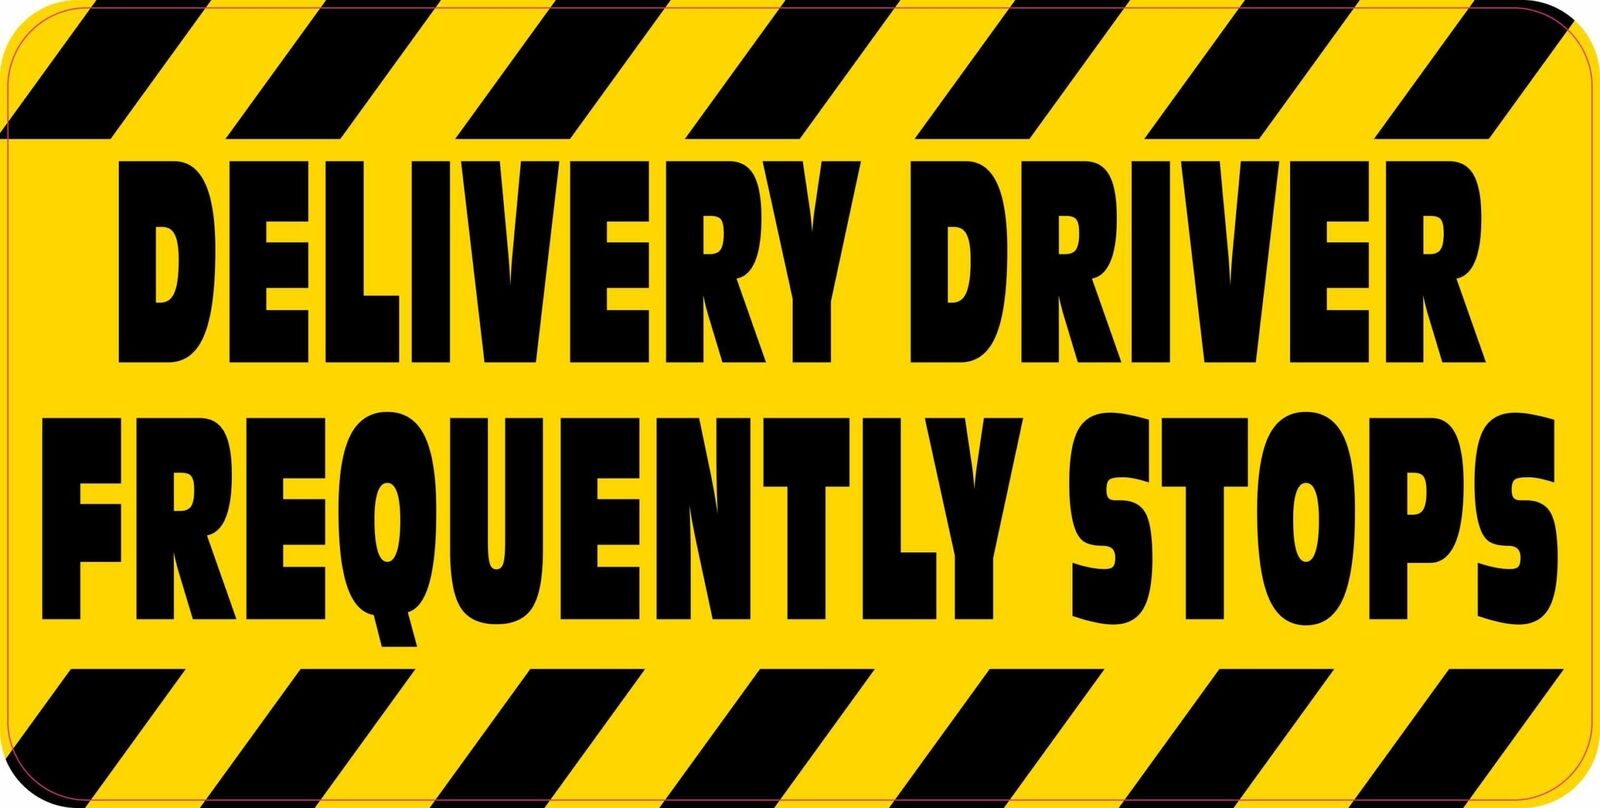 10in x 5in Delivery Driver Frequently Stops Magnet Car Vehicle Magnetic Sign